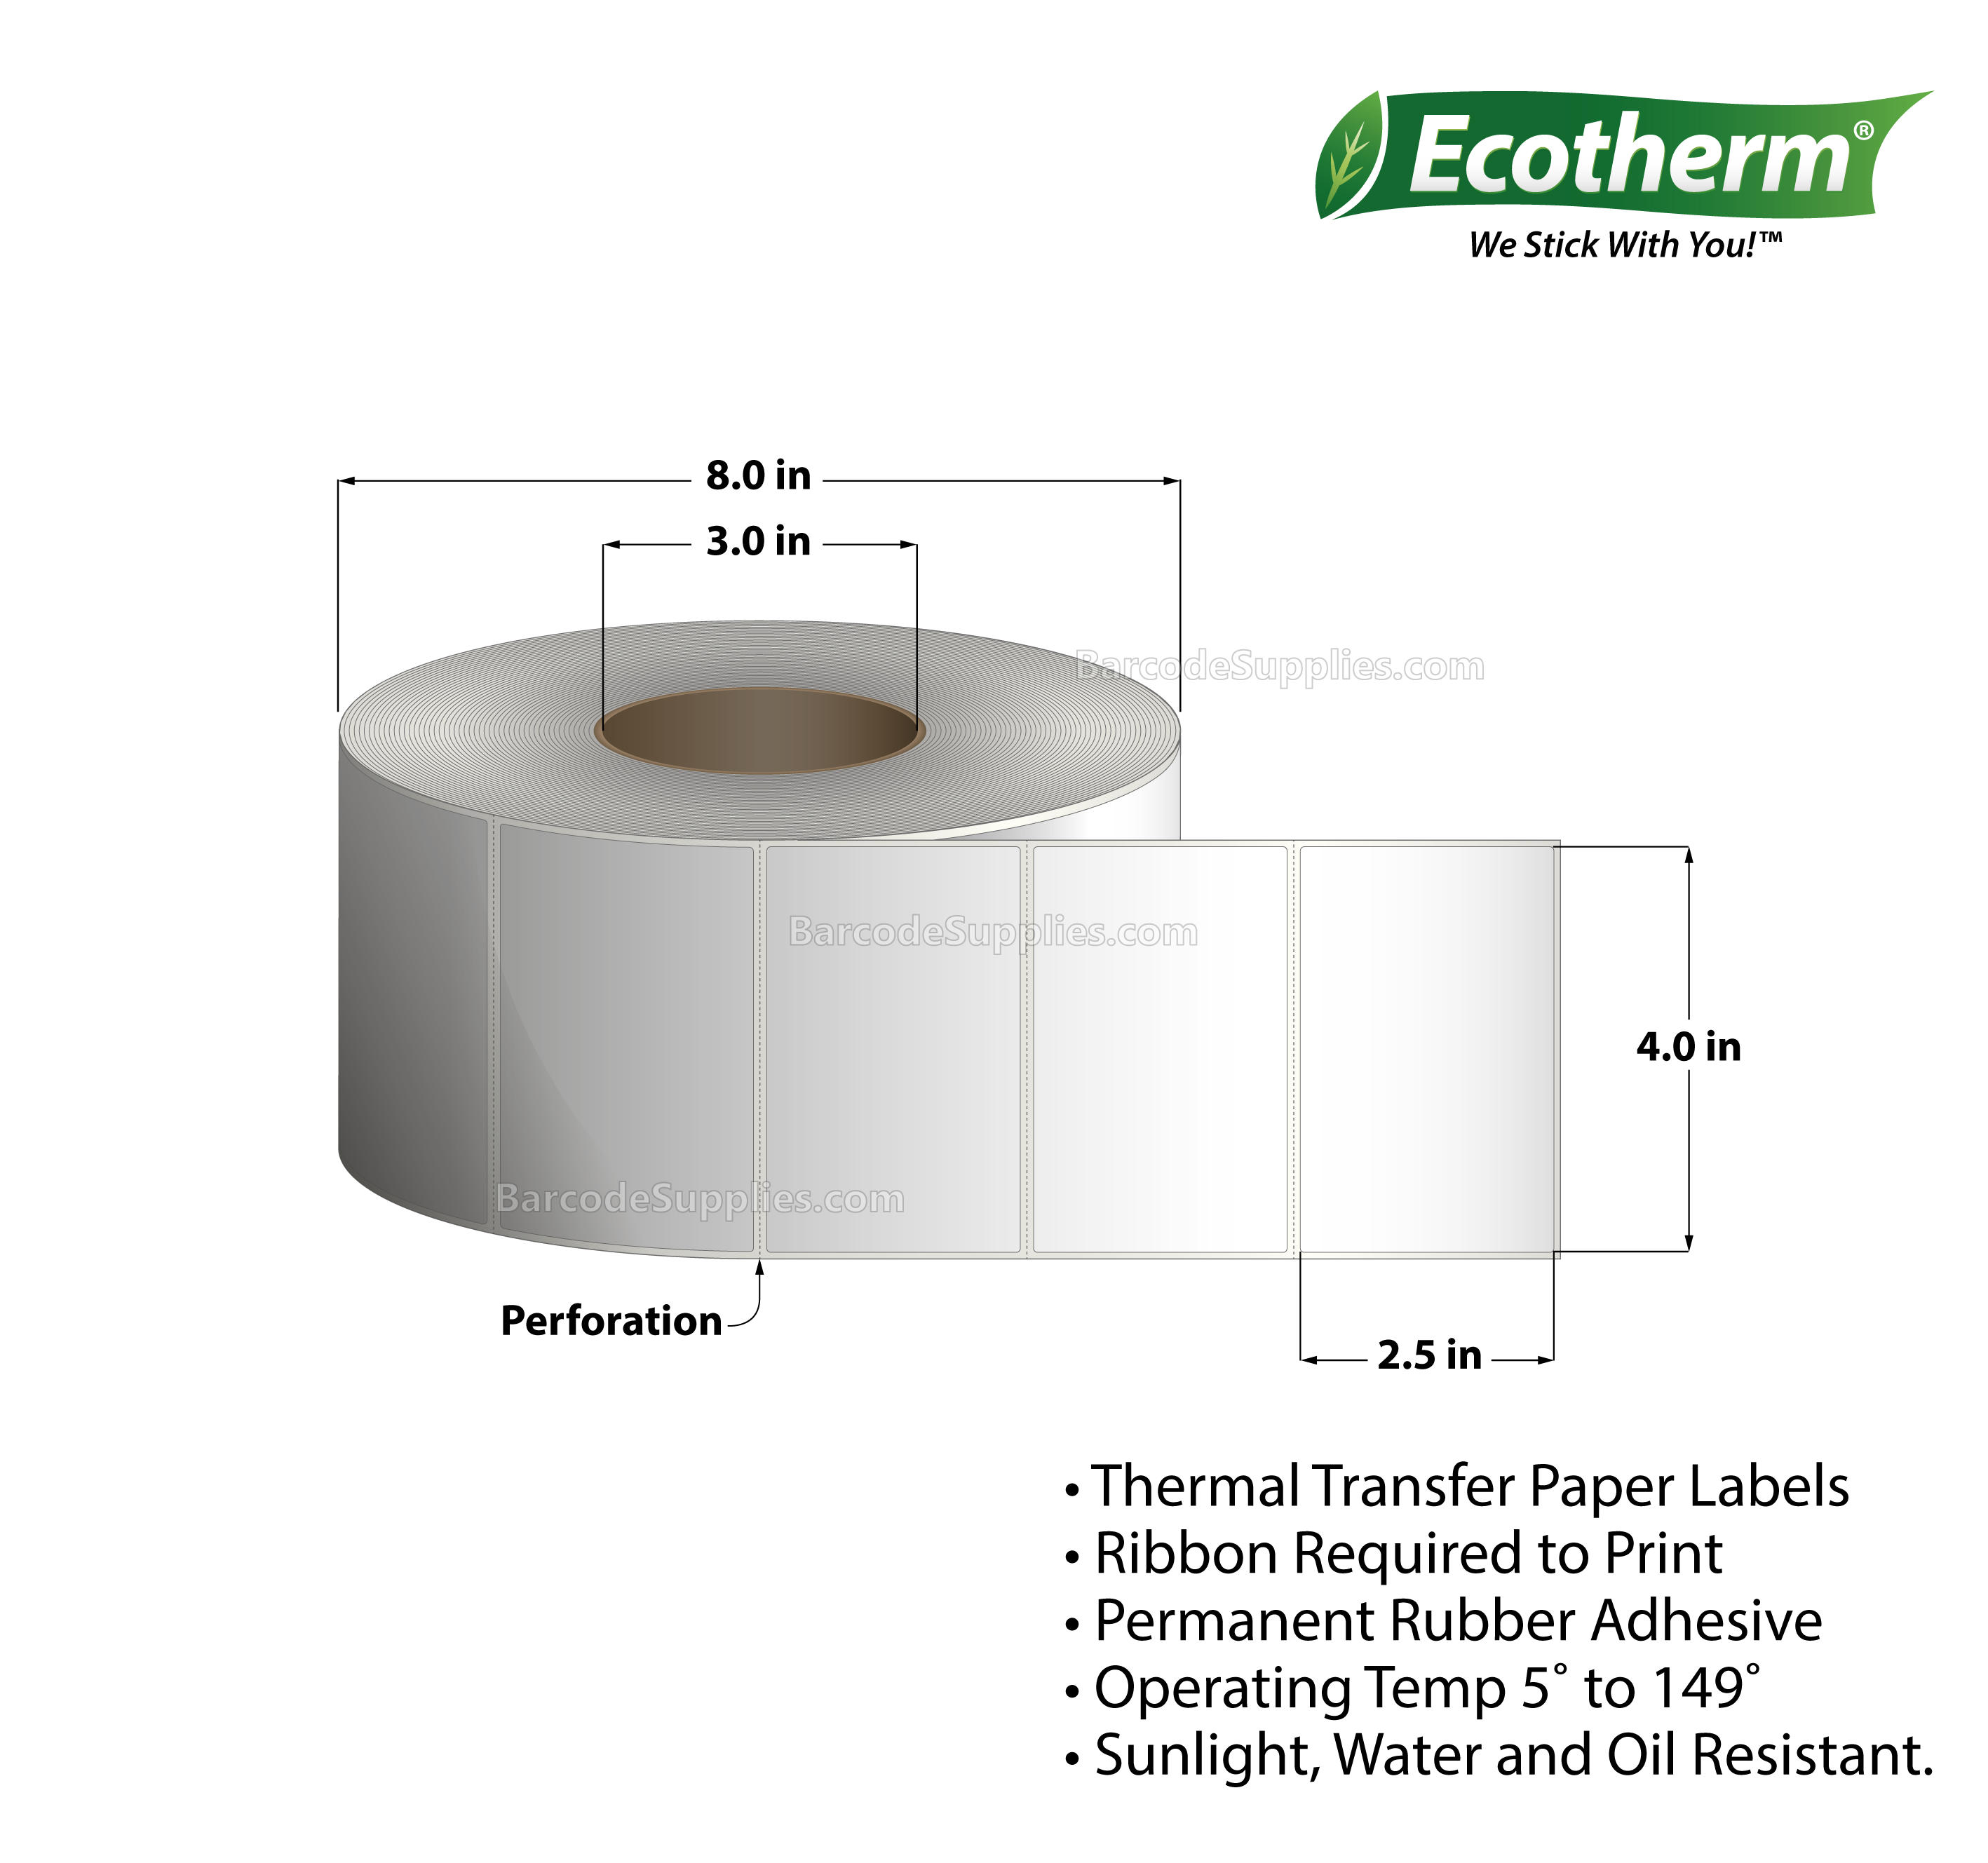 4 x 2.5 Thermal Transfer White Labels With Rubber Adhesive - Perforated - 2500 Labels Per Roll - Carton Of 4 Rolls - 10000 Labels Total - MPN: ECOTHERM28138-4